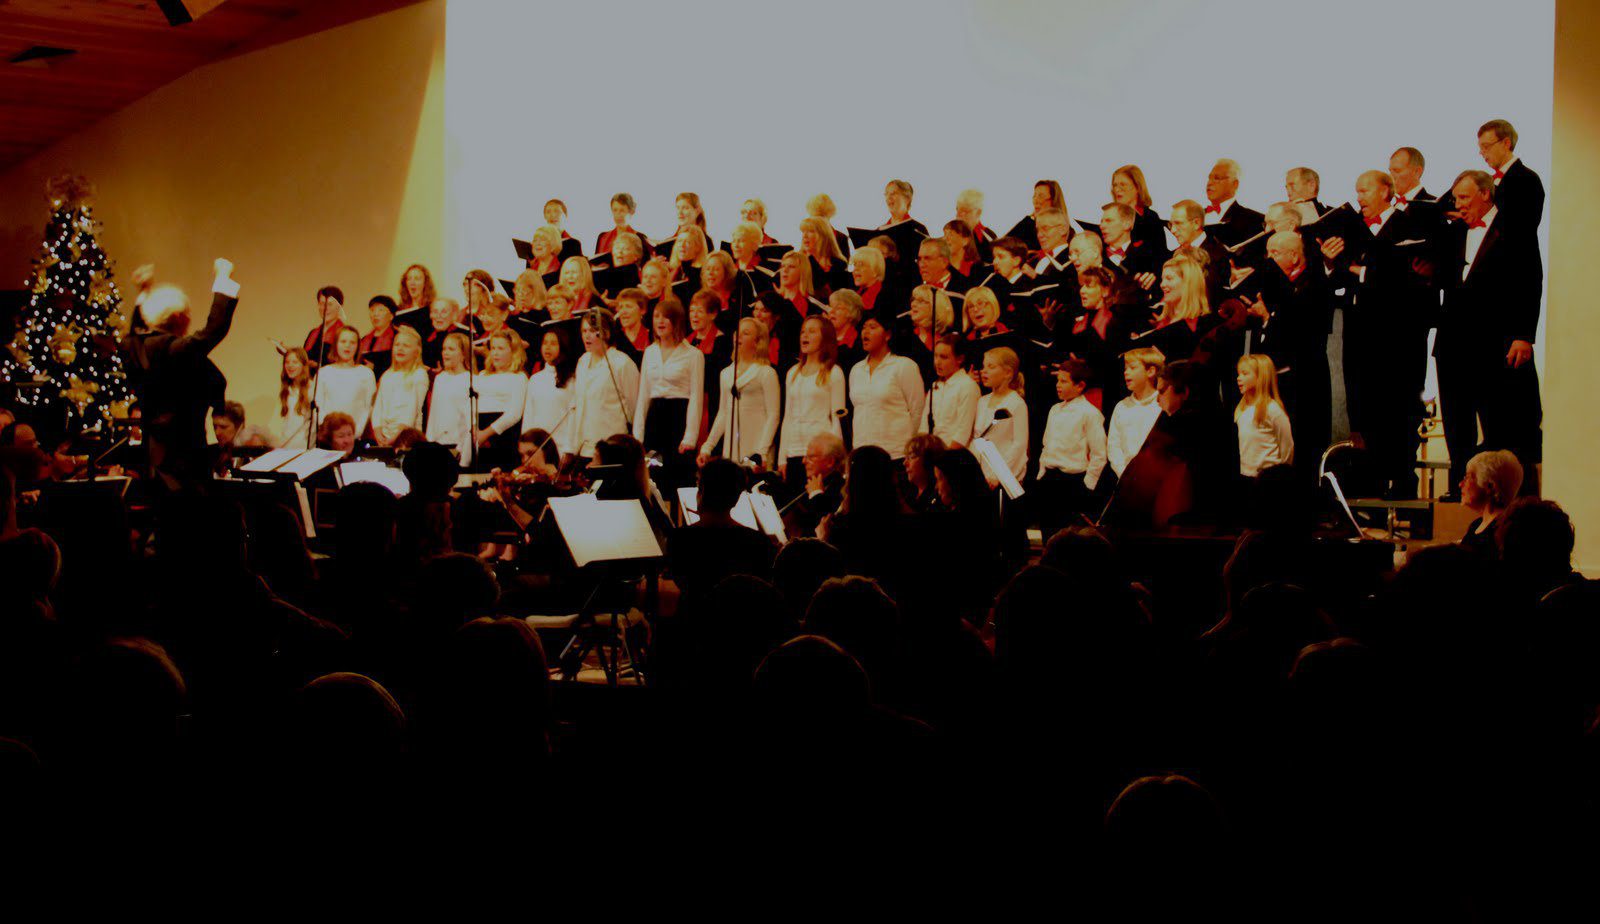 Celebrate the Christmas season with “Winter Wonderland” by the SYV Master Chorale